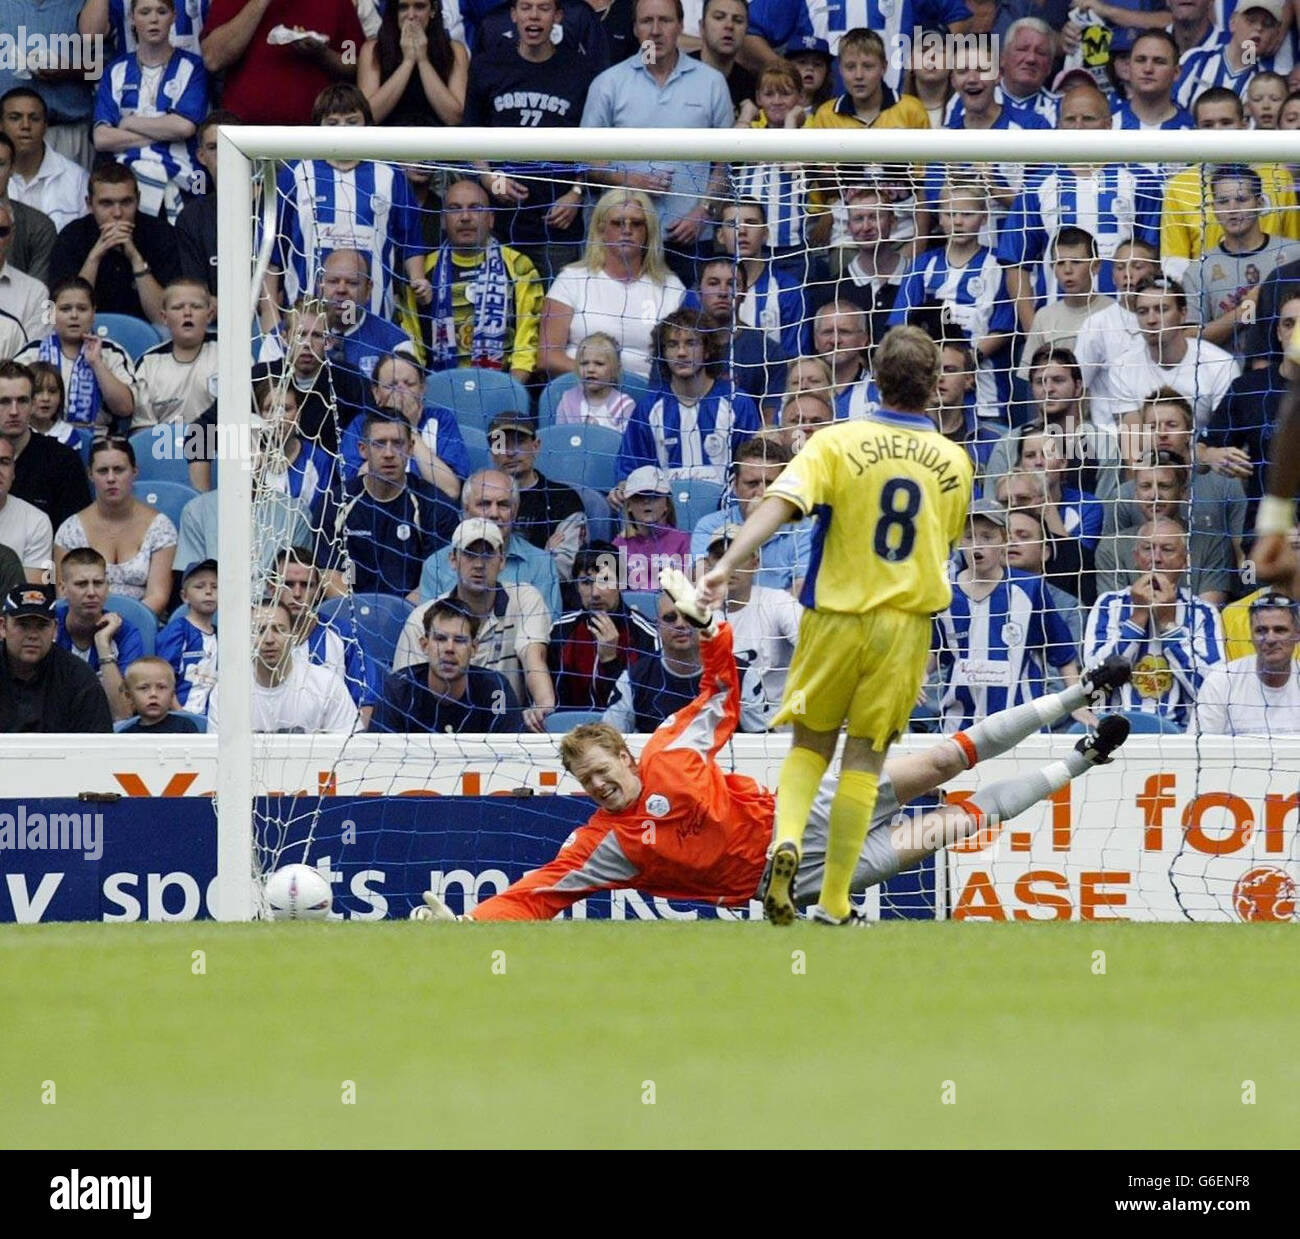 Former Sheffield Wednesday Star John Sheridan, scores from the spot past Sheffield Wednesday keeper Ola Tidman during the Nationwide Division Two match at Hillsborough, Sheffield. NO UNOFFICIAL CLUB WEBSITE USE. Stock Photo